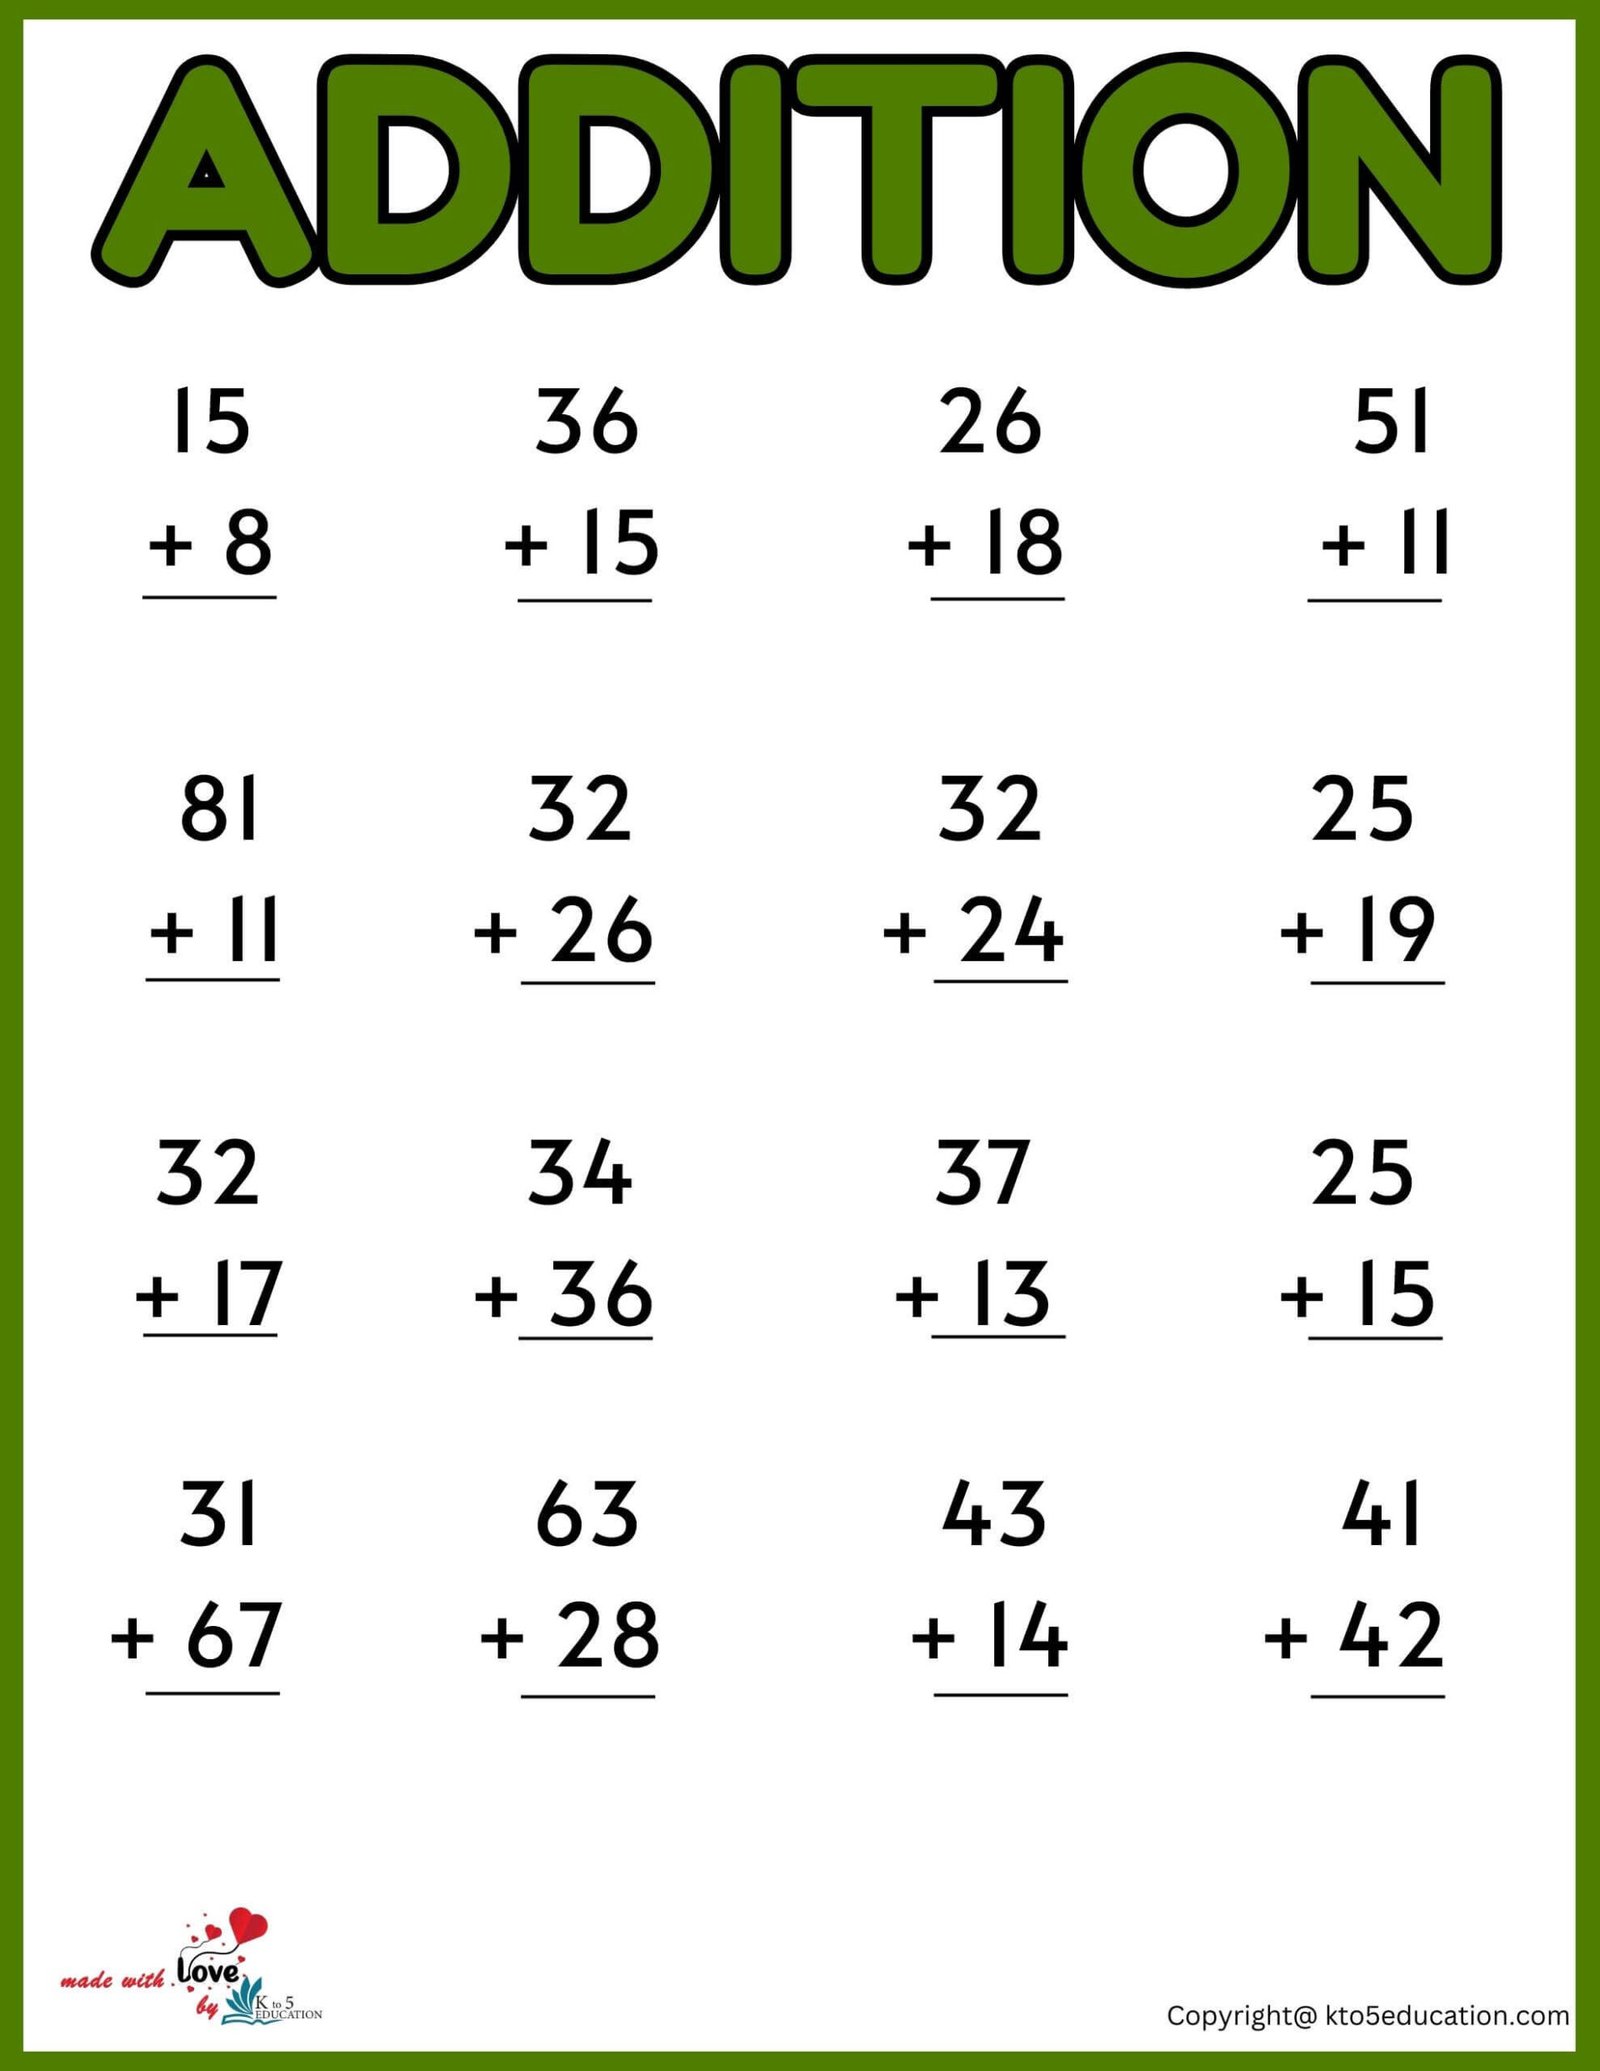 Addition Worksheet For Online Activities FREE Download